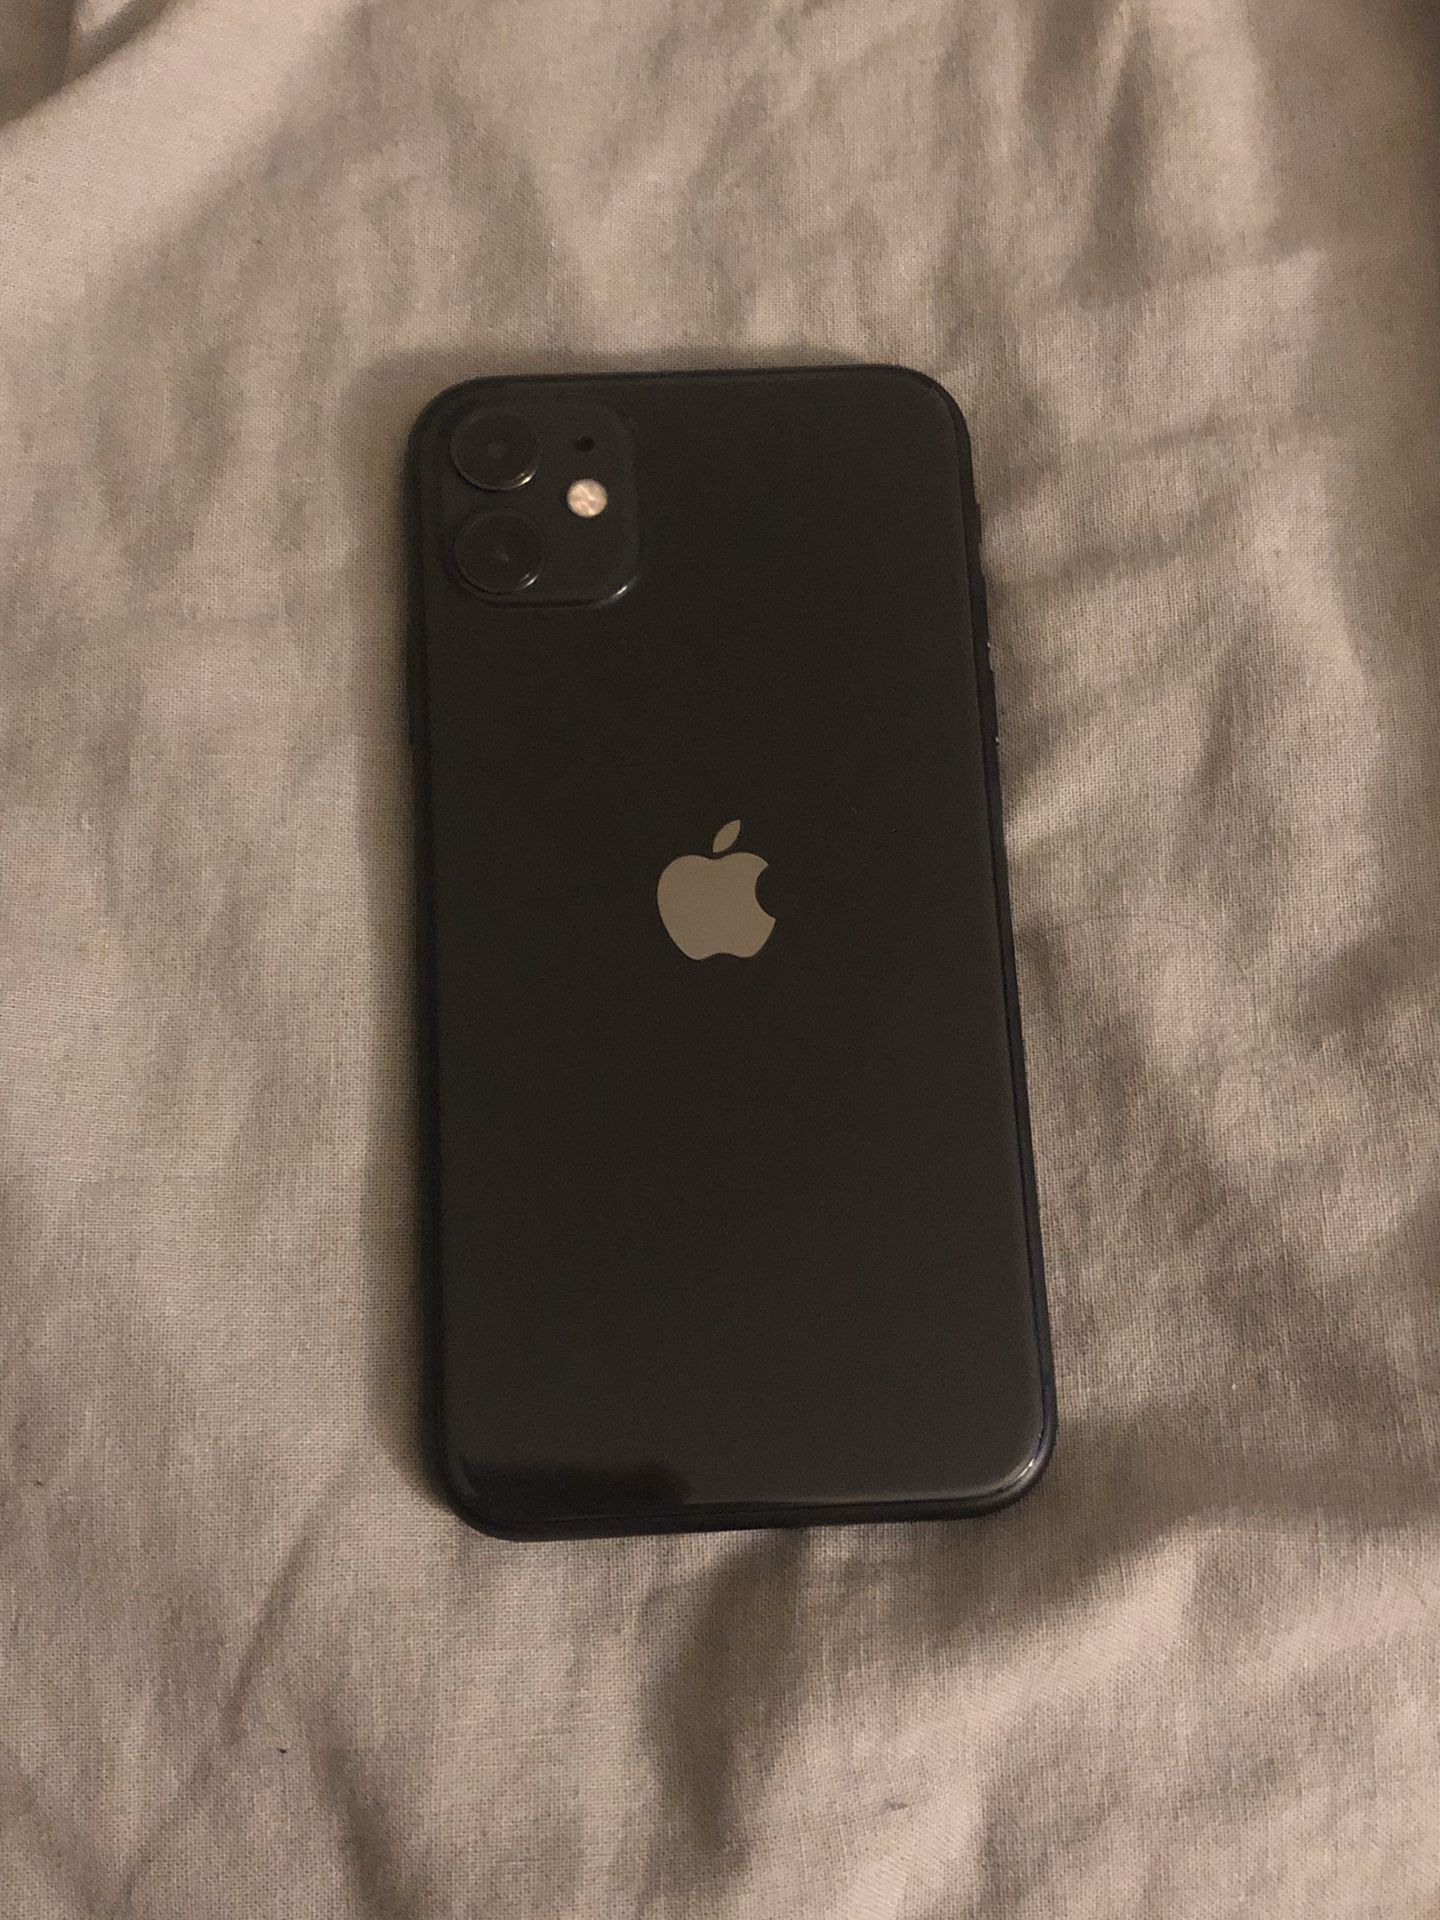 IPHONE 11 UNLOCKED ANY CARRIER